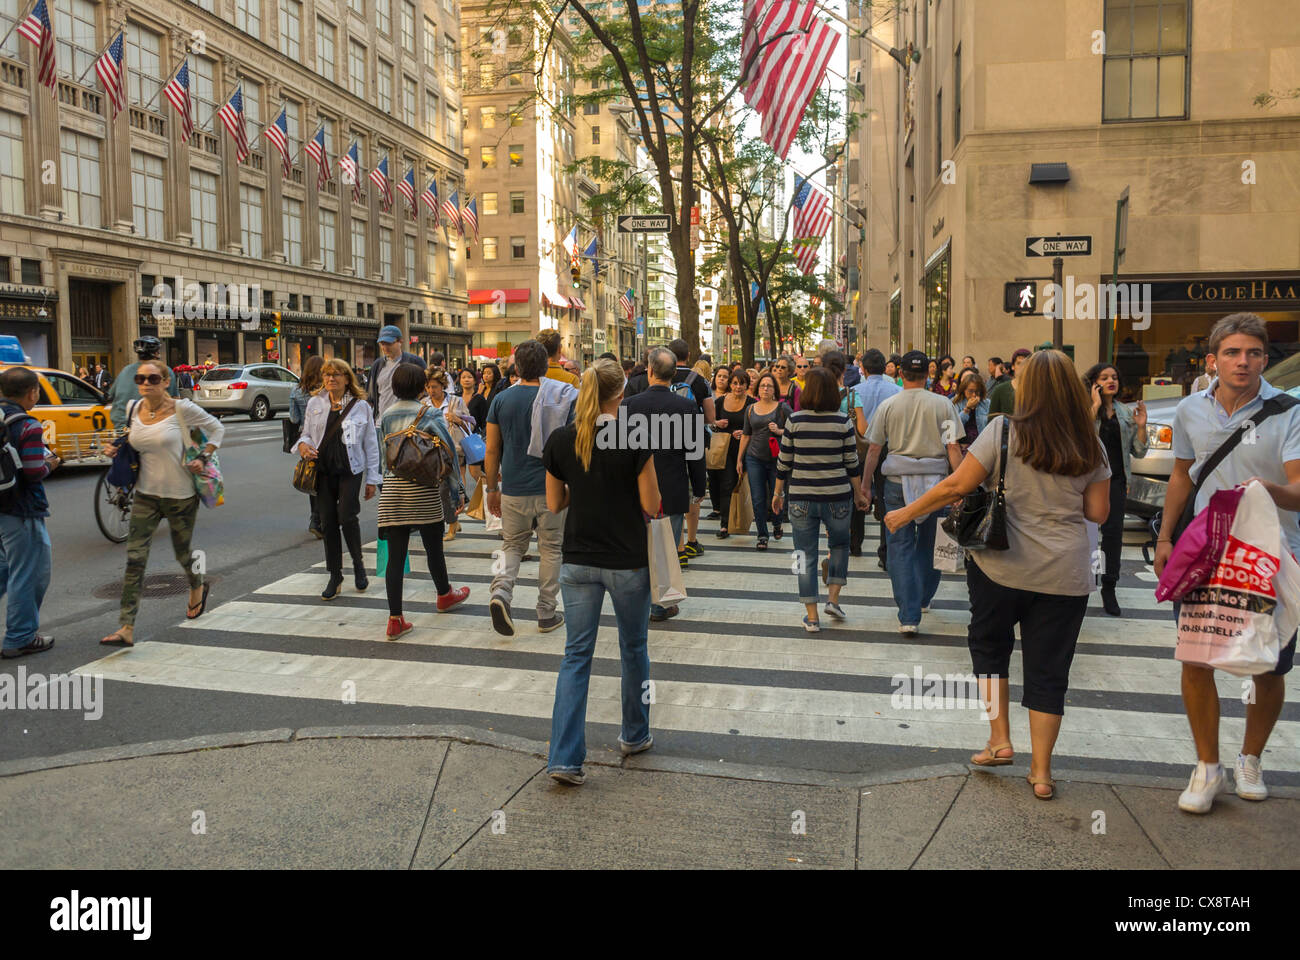 NEW YORK CITY - CIRCA 2016: Crowds Of People Are Busy Shopping At